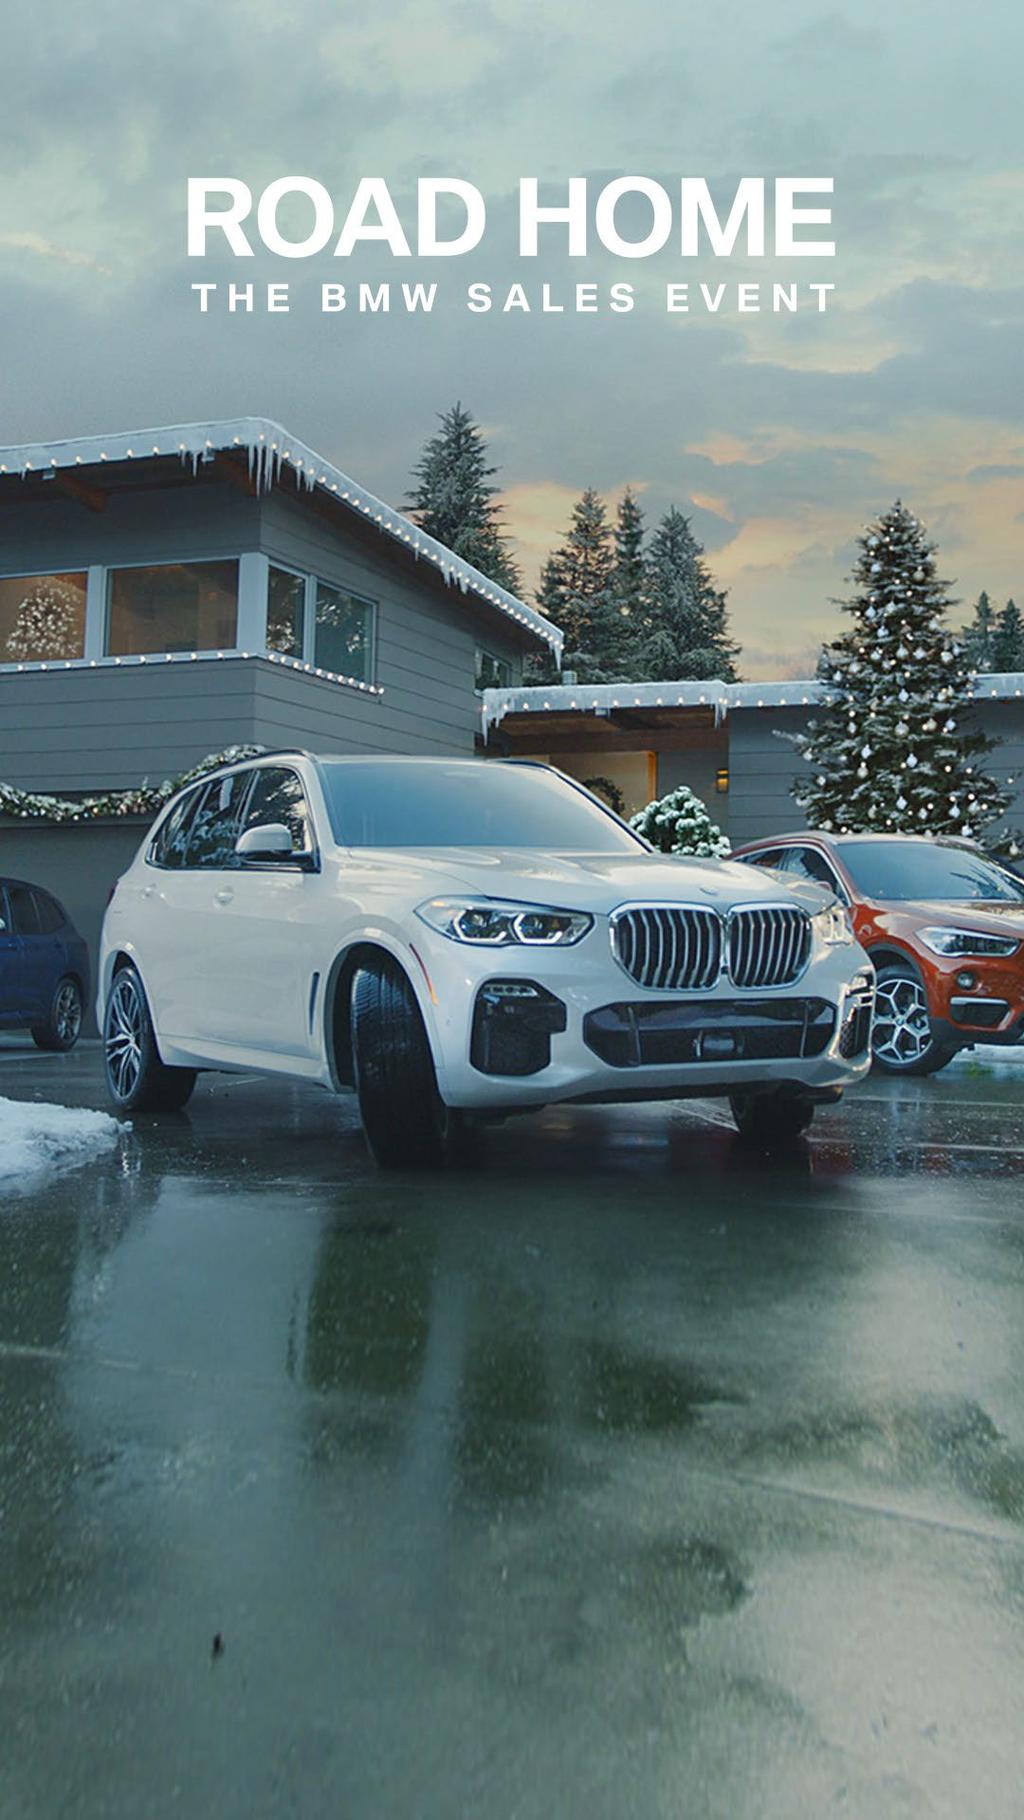 COMMAND THE ROAD HOME. THE BMW HOLIDAY SALES EVENT.